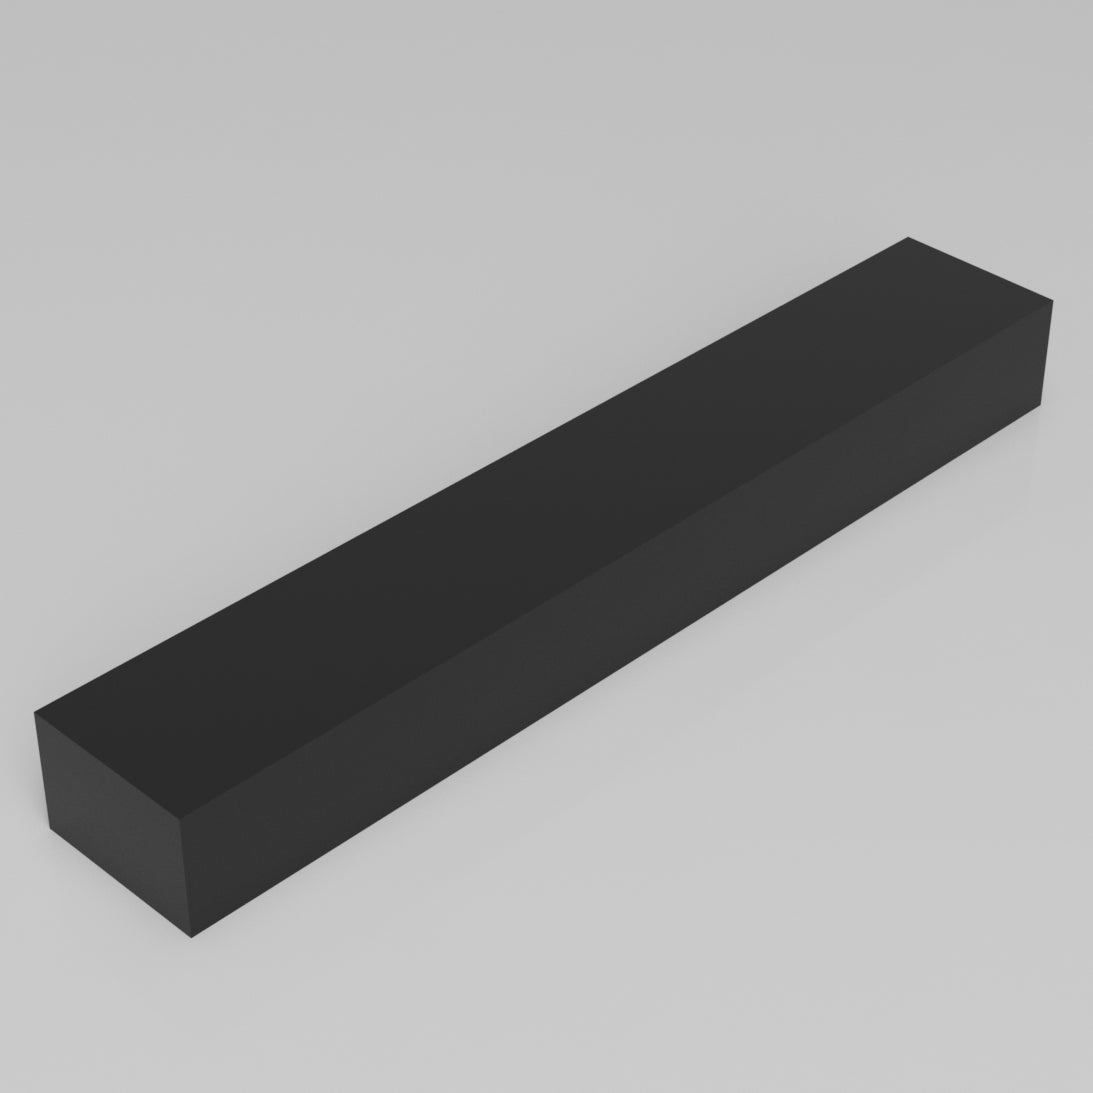 Machinable Wax Rectangular Block Front View 2 Inch by 3 Inch by 18 Inch